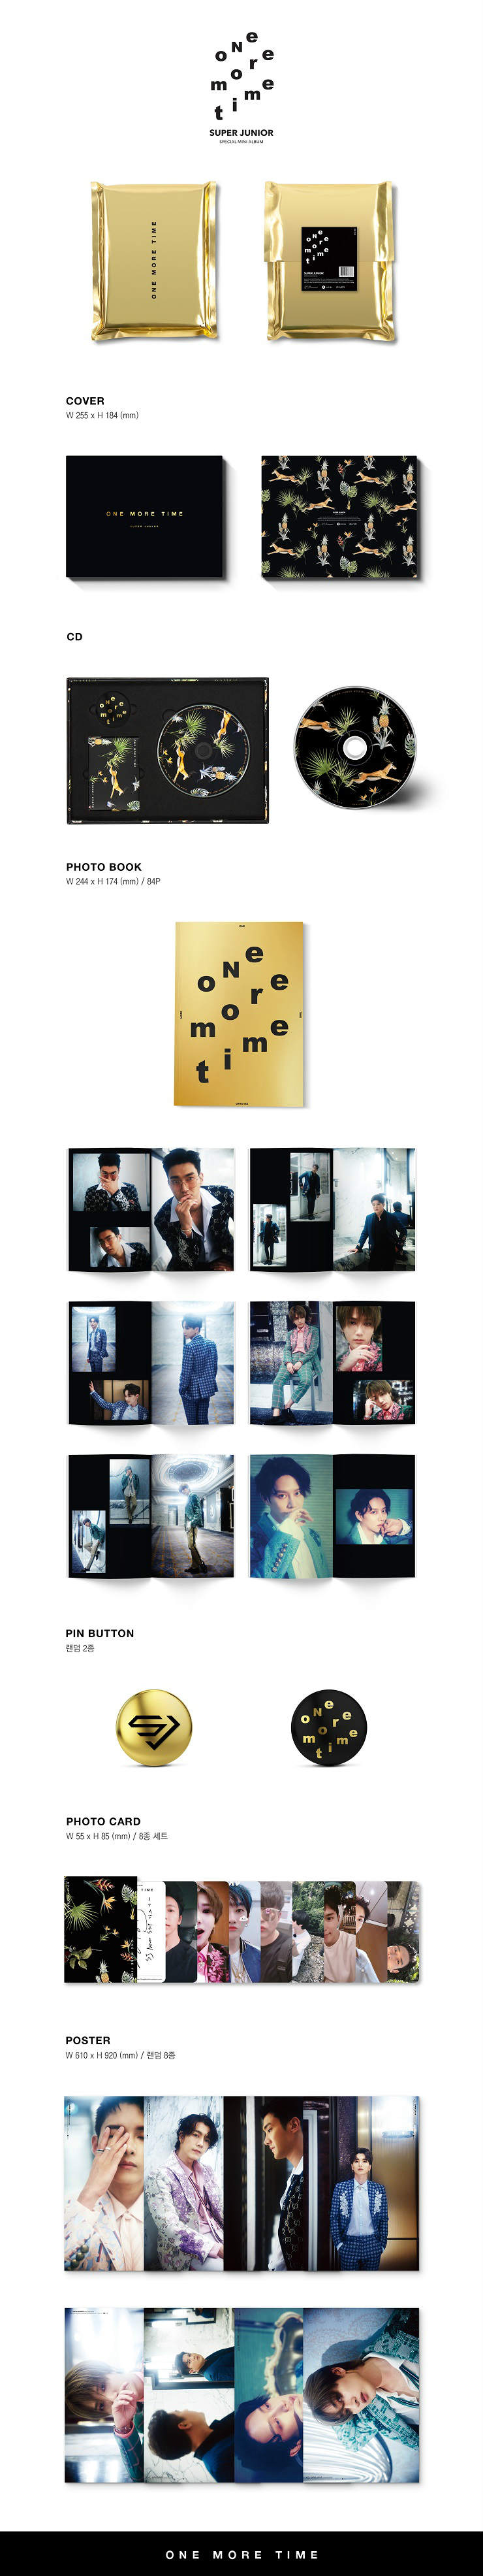 SM Entertainment Super Junior Special Mini Album CD+Pin Button+8 Photocards+Folded Poster Limited ver. One More Time 